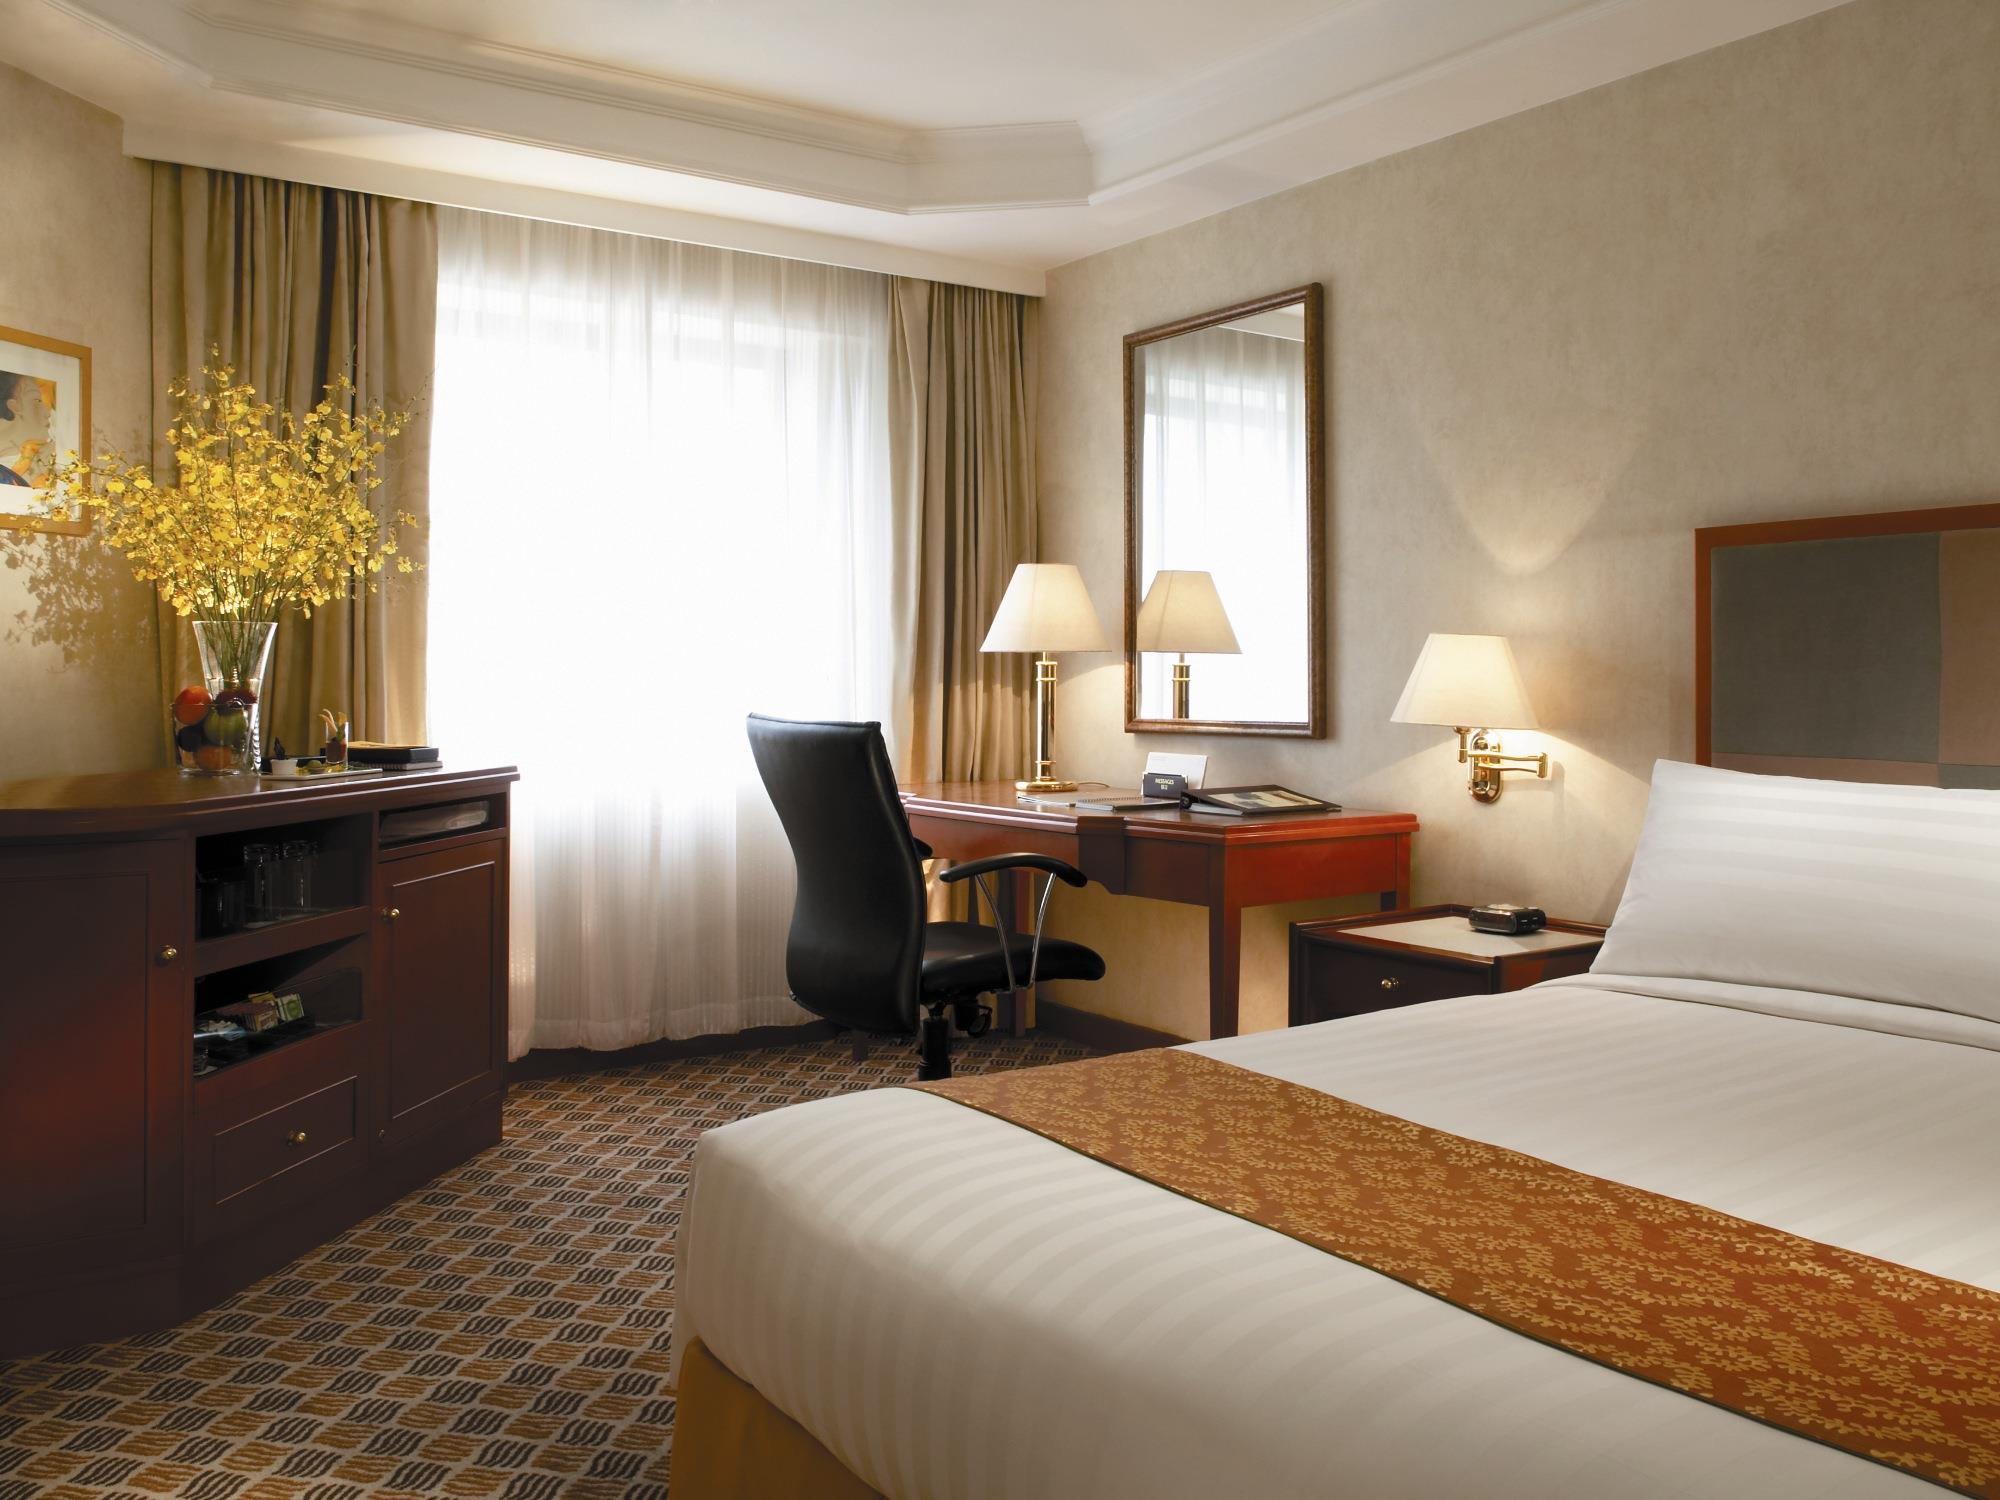 Traders Hotel Beijing By Shangri-La Beijing FAQ 2016, What facilities are there in Traders Hotel Beijing By Shangri-La Beijing 2016, What Languages Spoken are Supported in Traders Hotel Beijing By Shangri-La Beijing 2016, Which payment cards are accepted in Traders Hotel Beijing By Shangri-La Beijing , Beijing Traders Hotel Beijing By Shangri-La room facilities and services Q&A 2016, Beijing Traders Hotel Beijing By Shangri-La online booking services 2016, Beijing Traders Hotel Beijing By Shangri-La address 2016, Beijing Traders Hotel Beijing By Shangri-La telephone number 2016,Beijing Traders Hotel Beijing By Shangri-La map 2016, Beijing Traders Hotel Beijing By Shangri-La traffic guide 2016, how to go Beijing Traders Hotel Beijing By Shangri-La, Beijing Traders Hotel Beijing By Shangri-La booking online 2016, Beijing Traders Hotel Beijing By Shangri-La room types 2016.